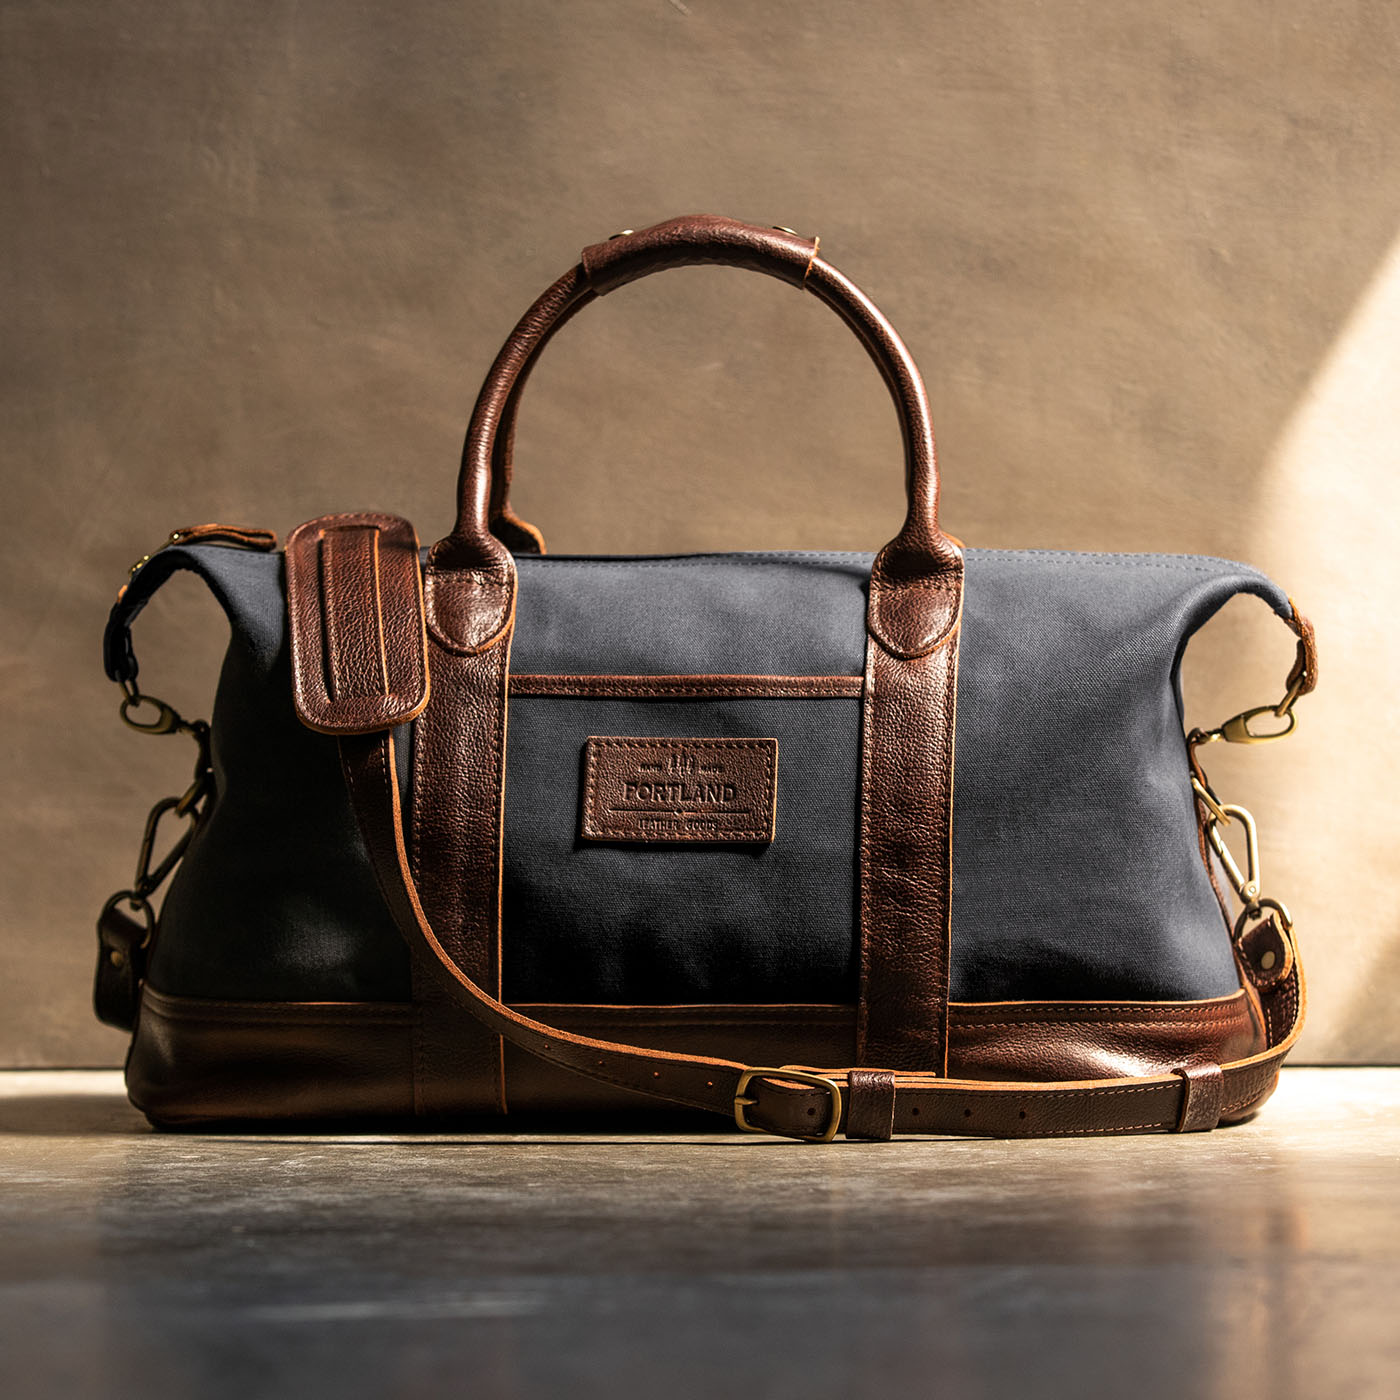 Leather and Canvas Duffel Bag